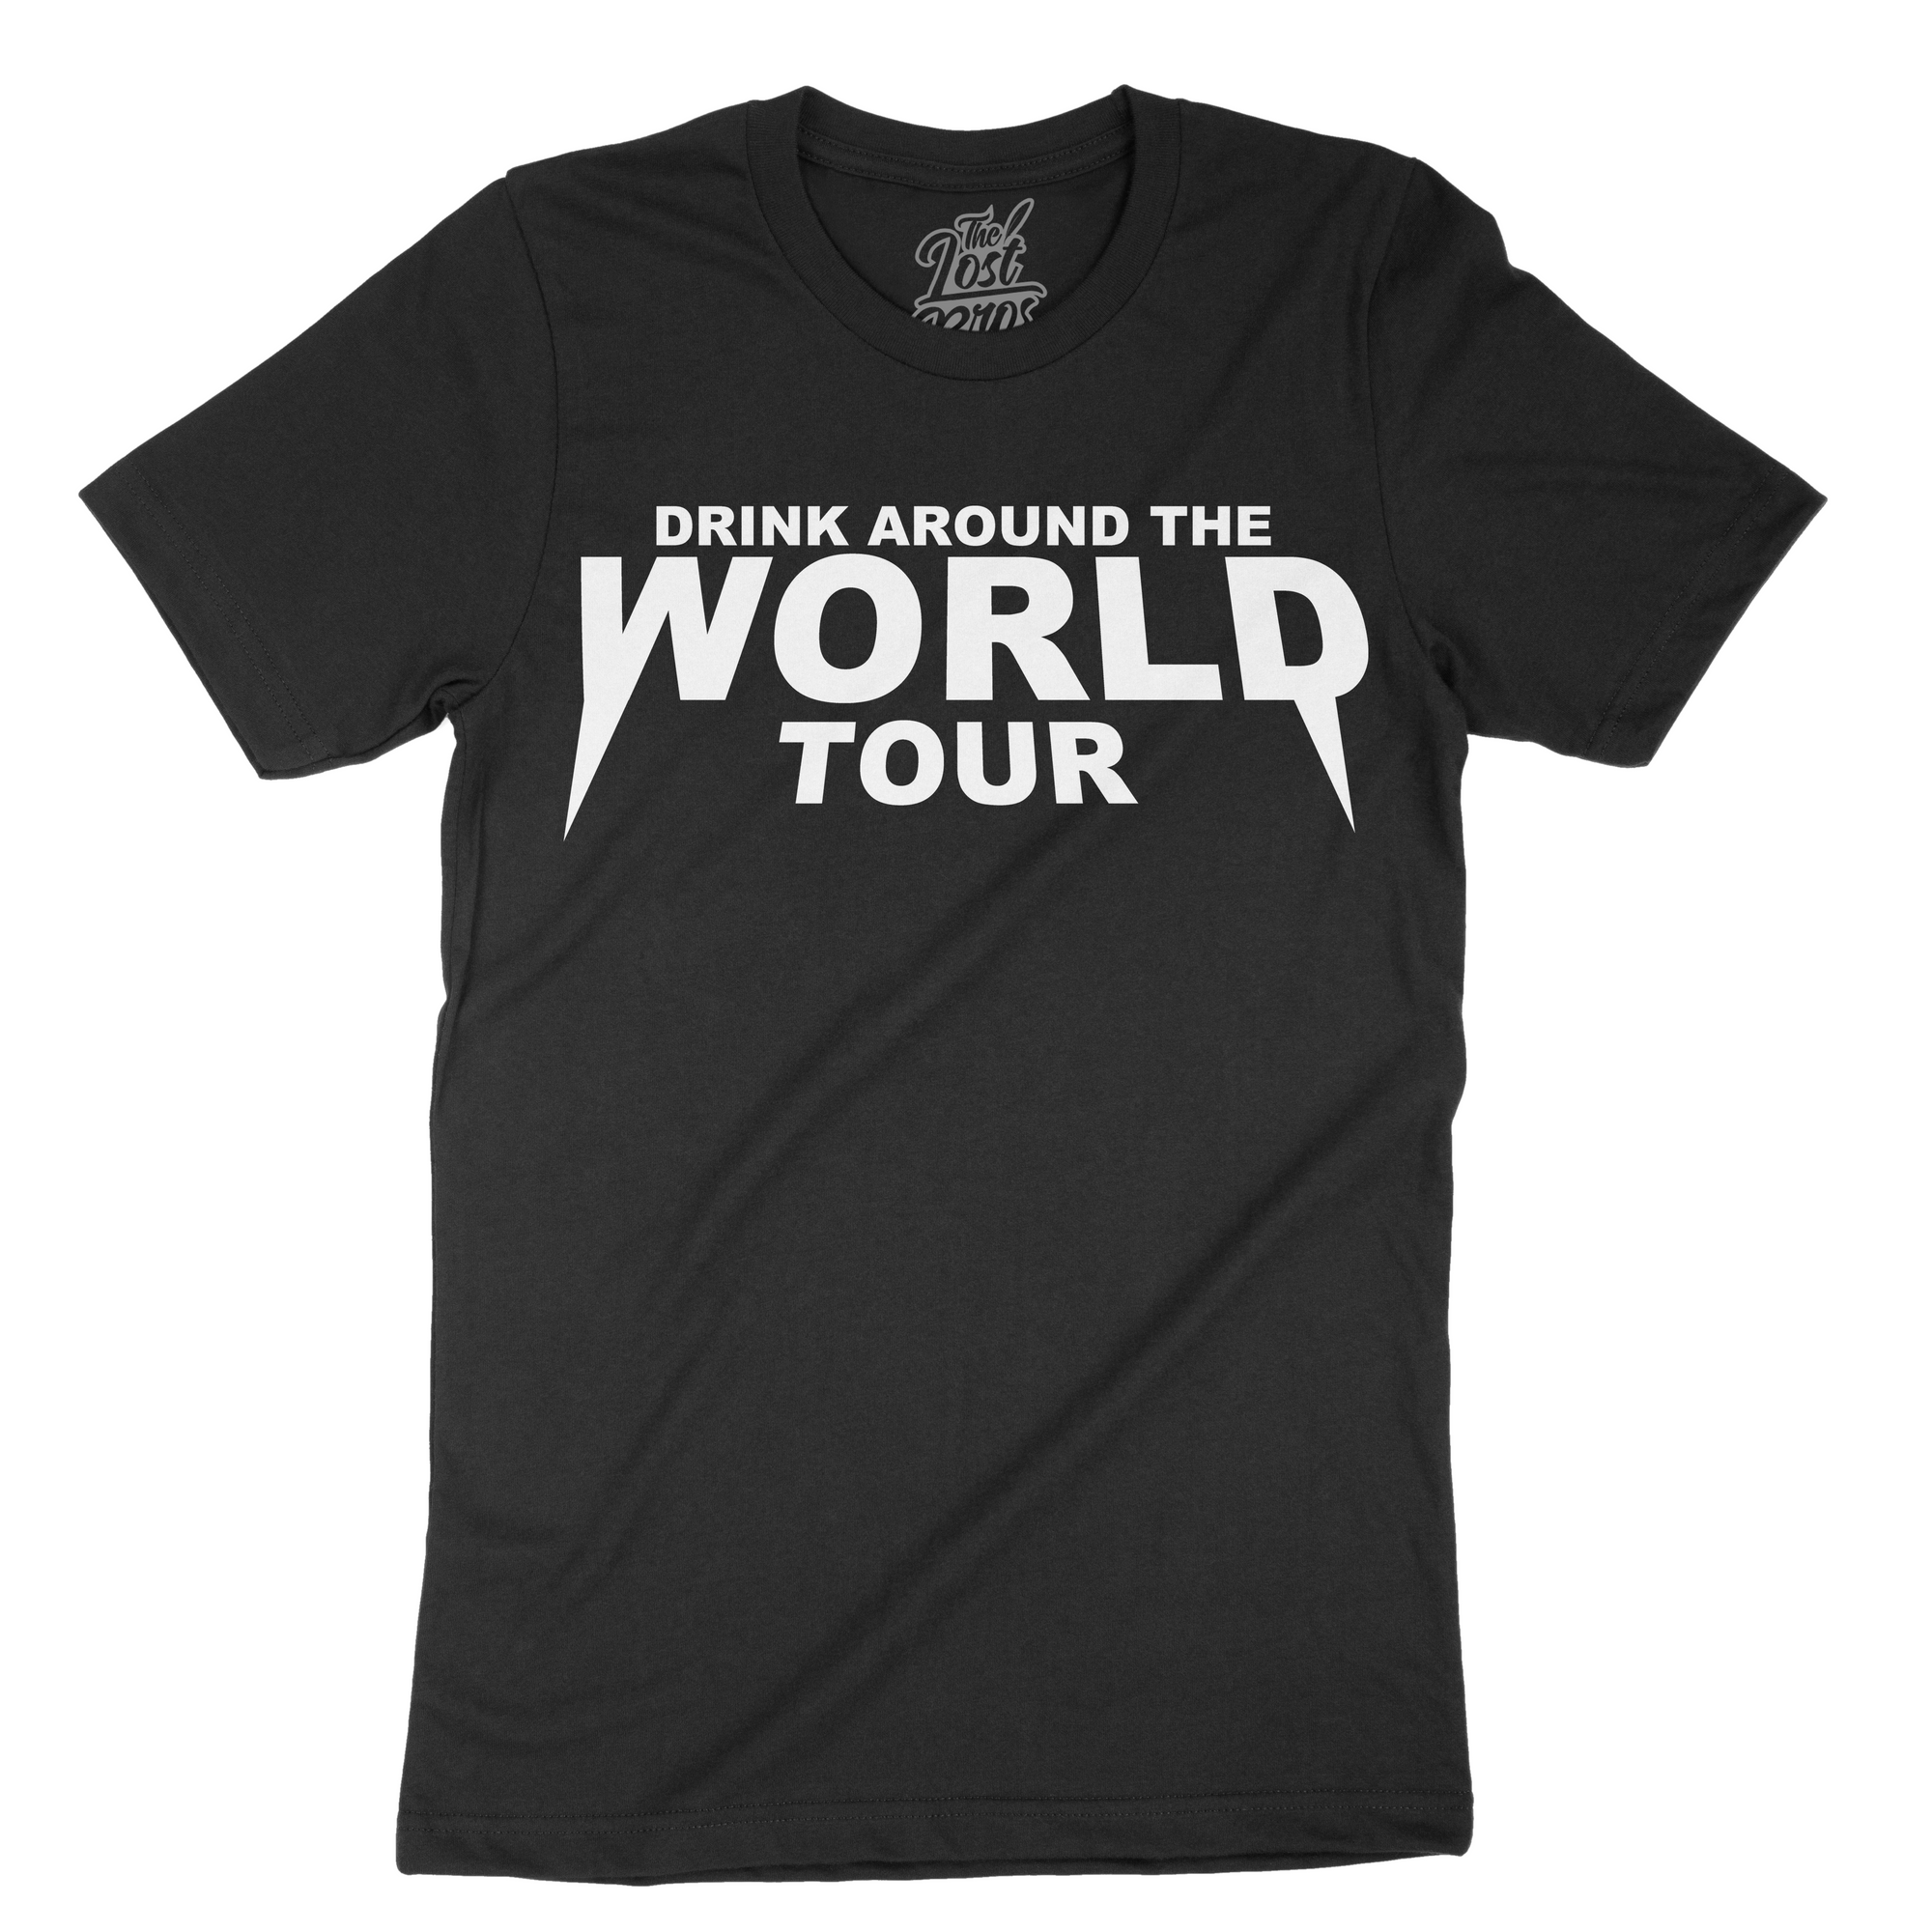 Drink Around the World Tour Tee - Black The Lost Bros